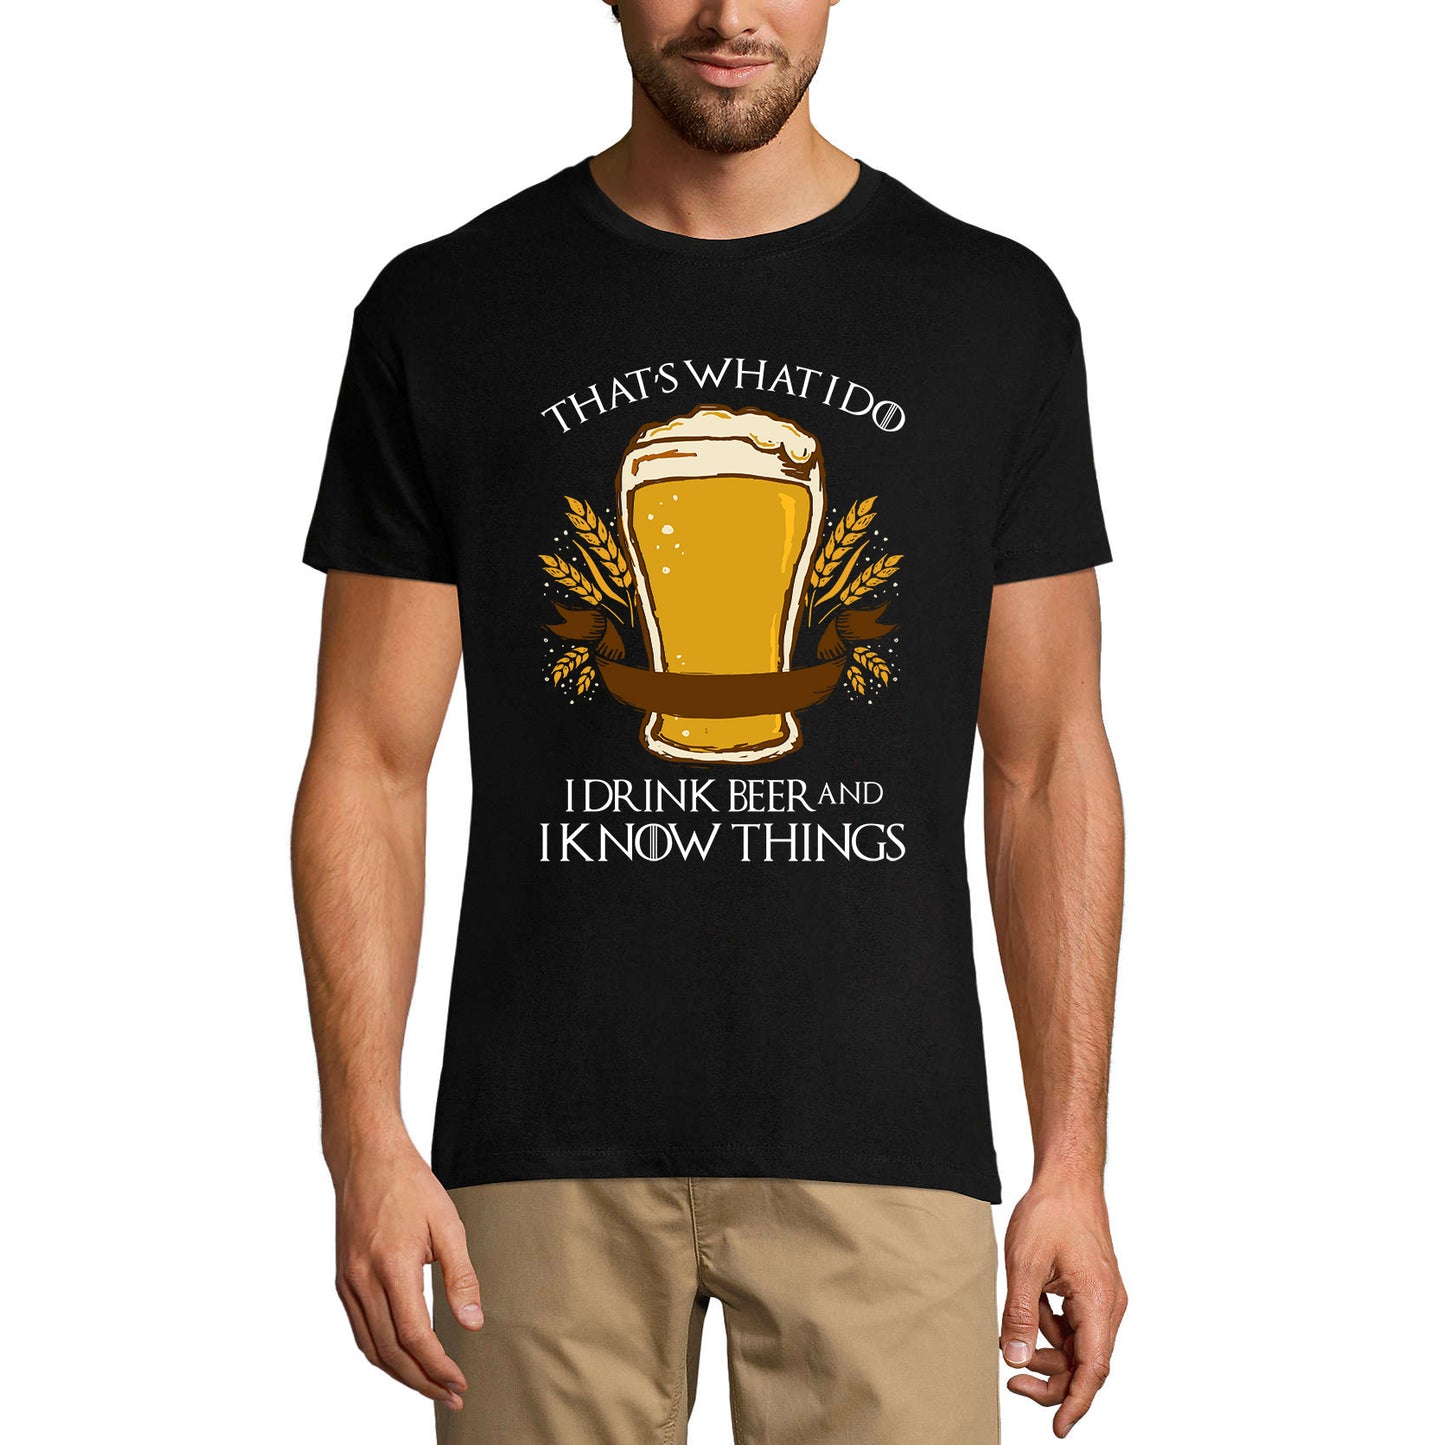 ULTRABASIC Herren-T-Shirt „That's What I Do I Drink Beer and I Know Things“ – Bierliebhaber-T-Shirt